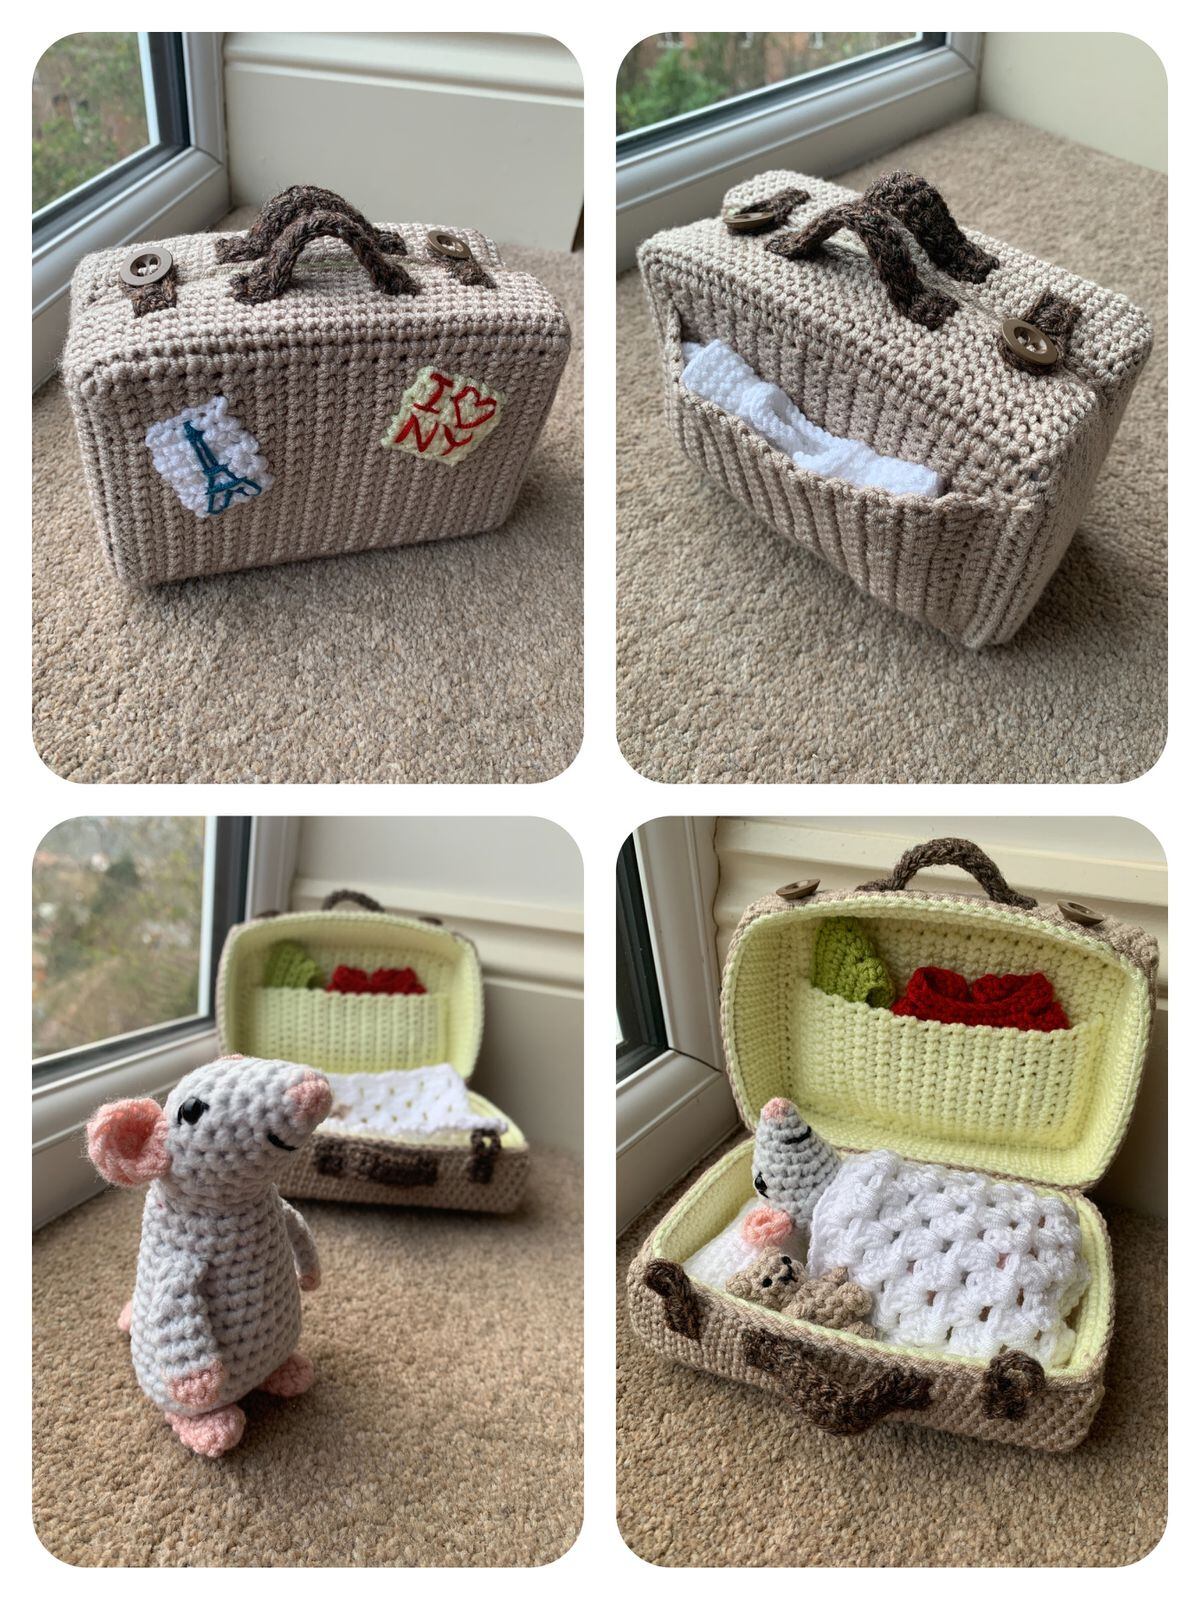 Her mouse in a suitcase design